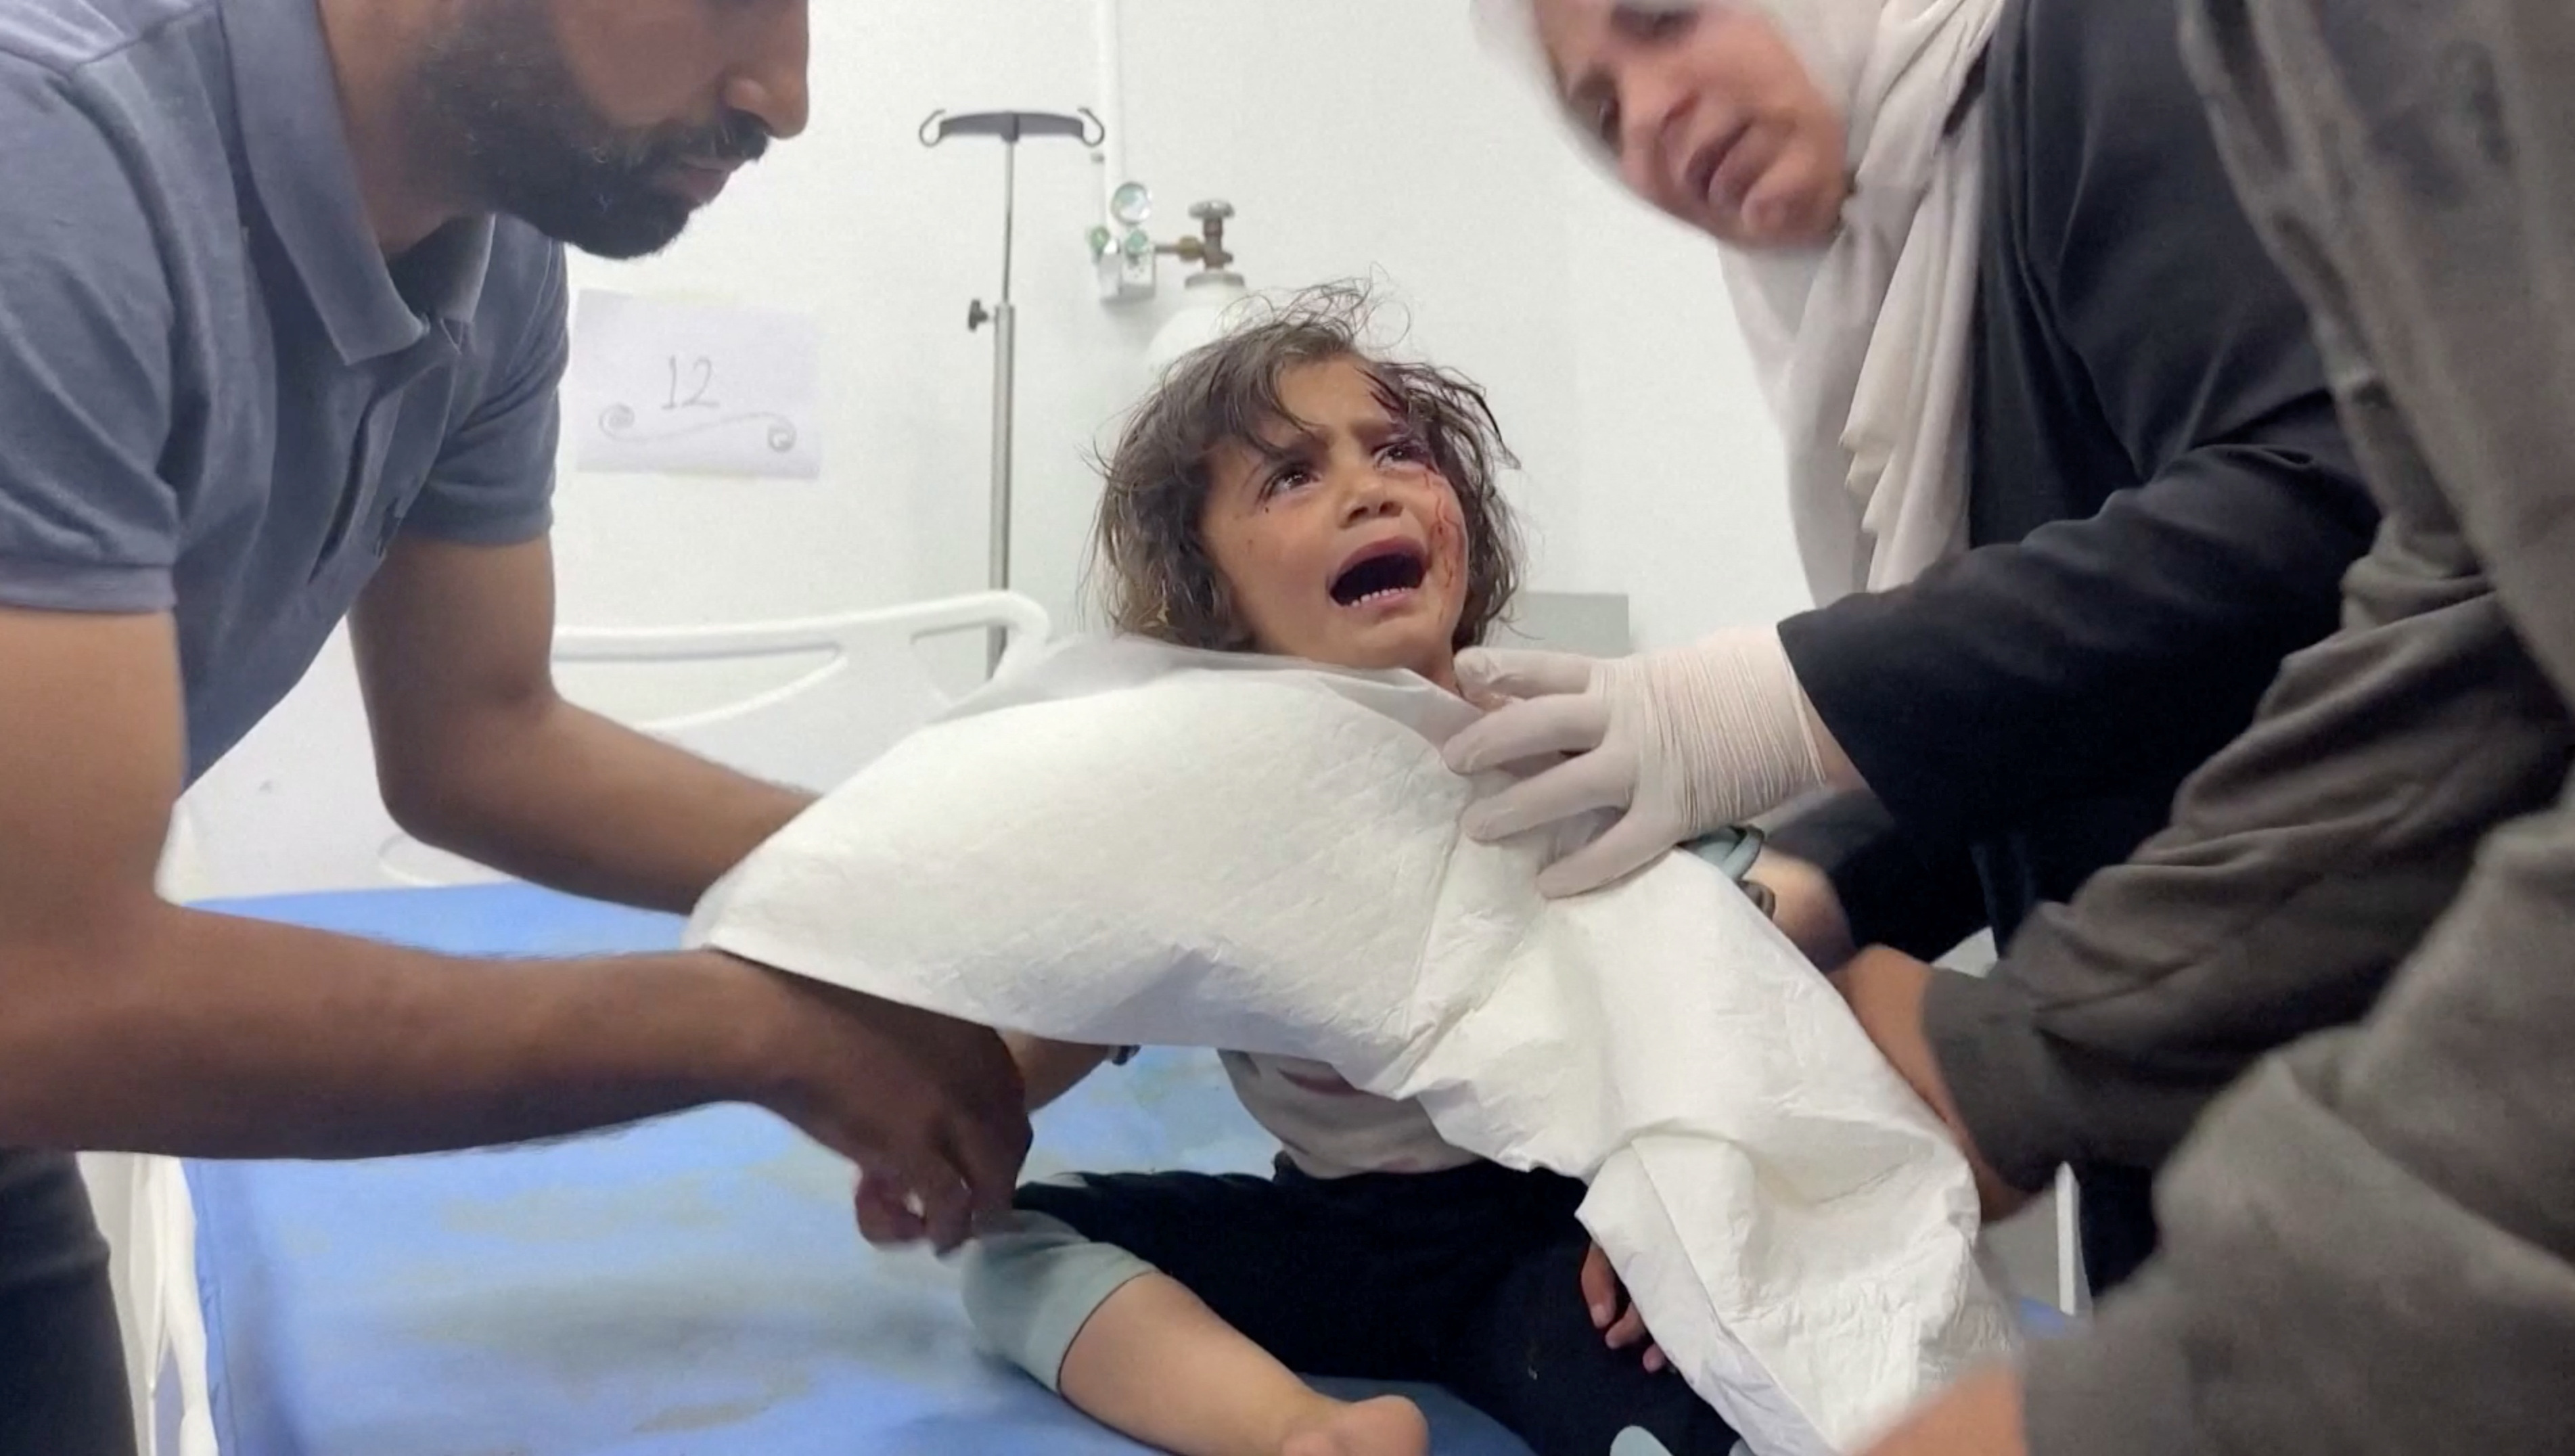 A Palestinian child, wounded in an Israeli strike on an area designated for displaced people, is assisted at a hospital in Rafah